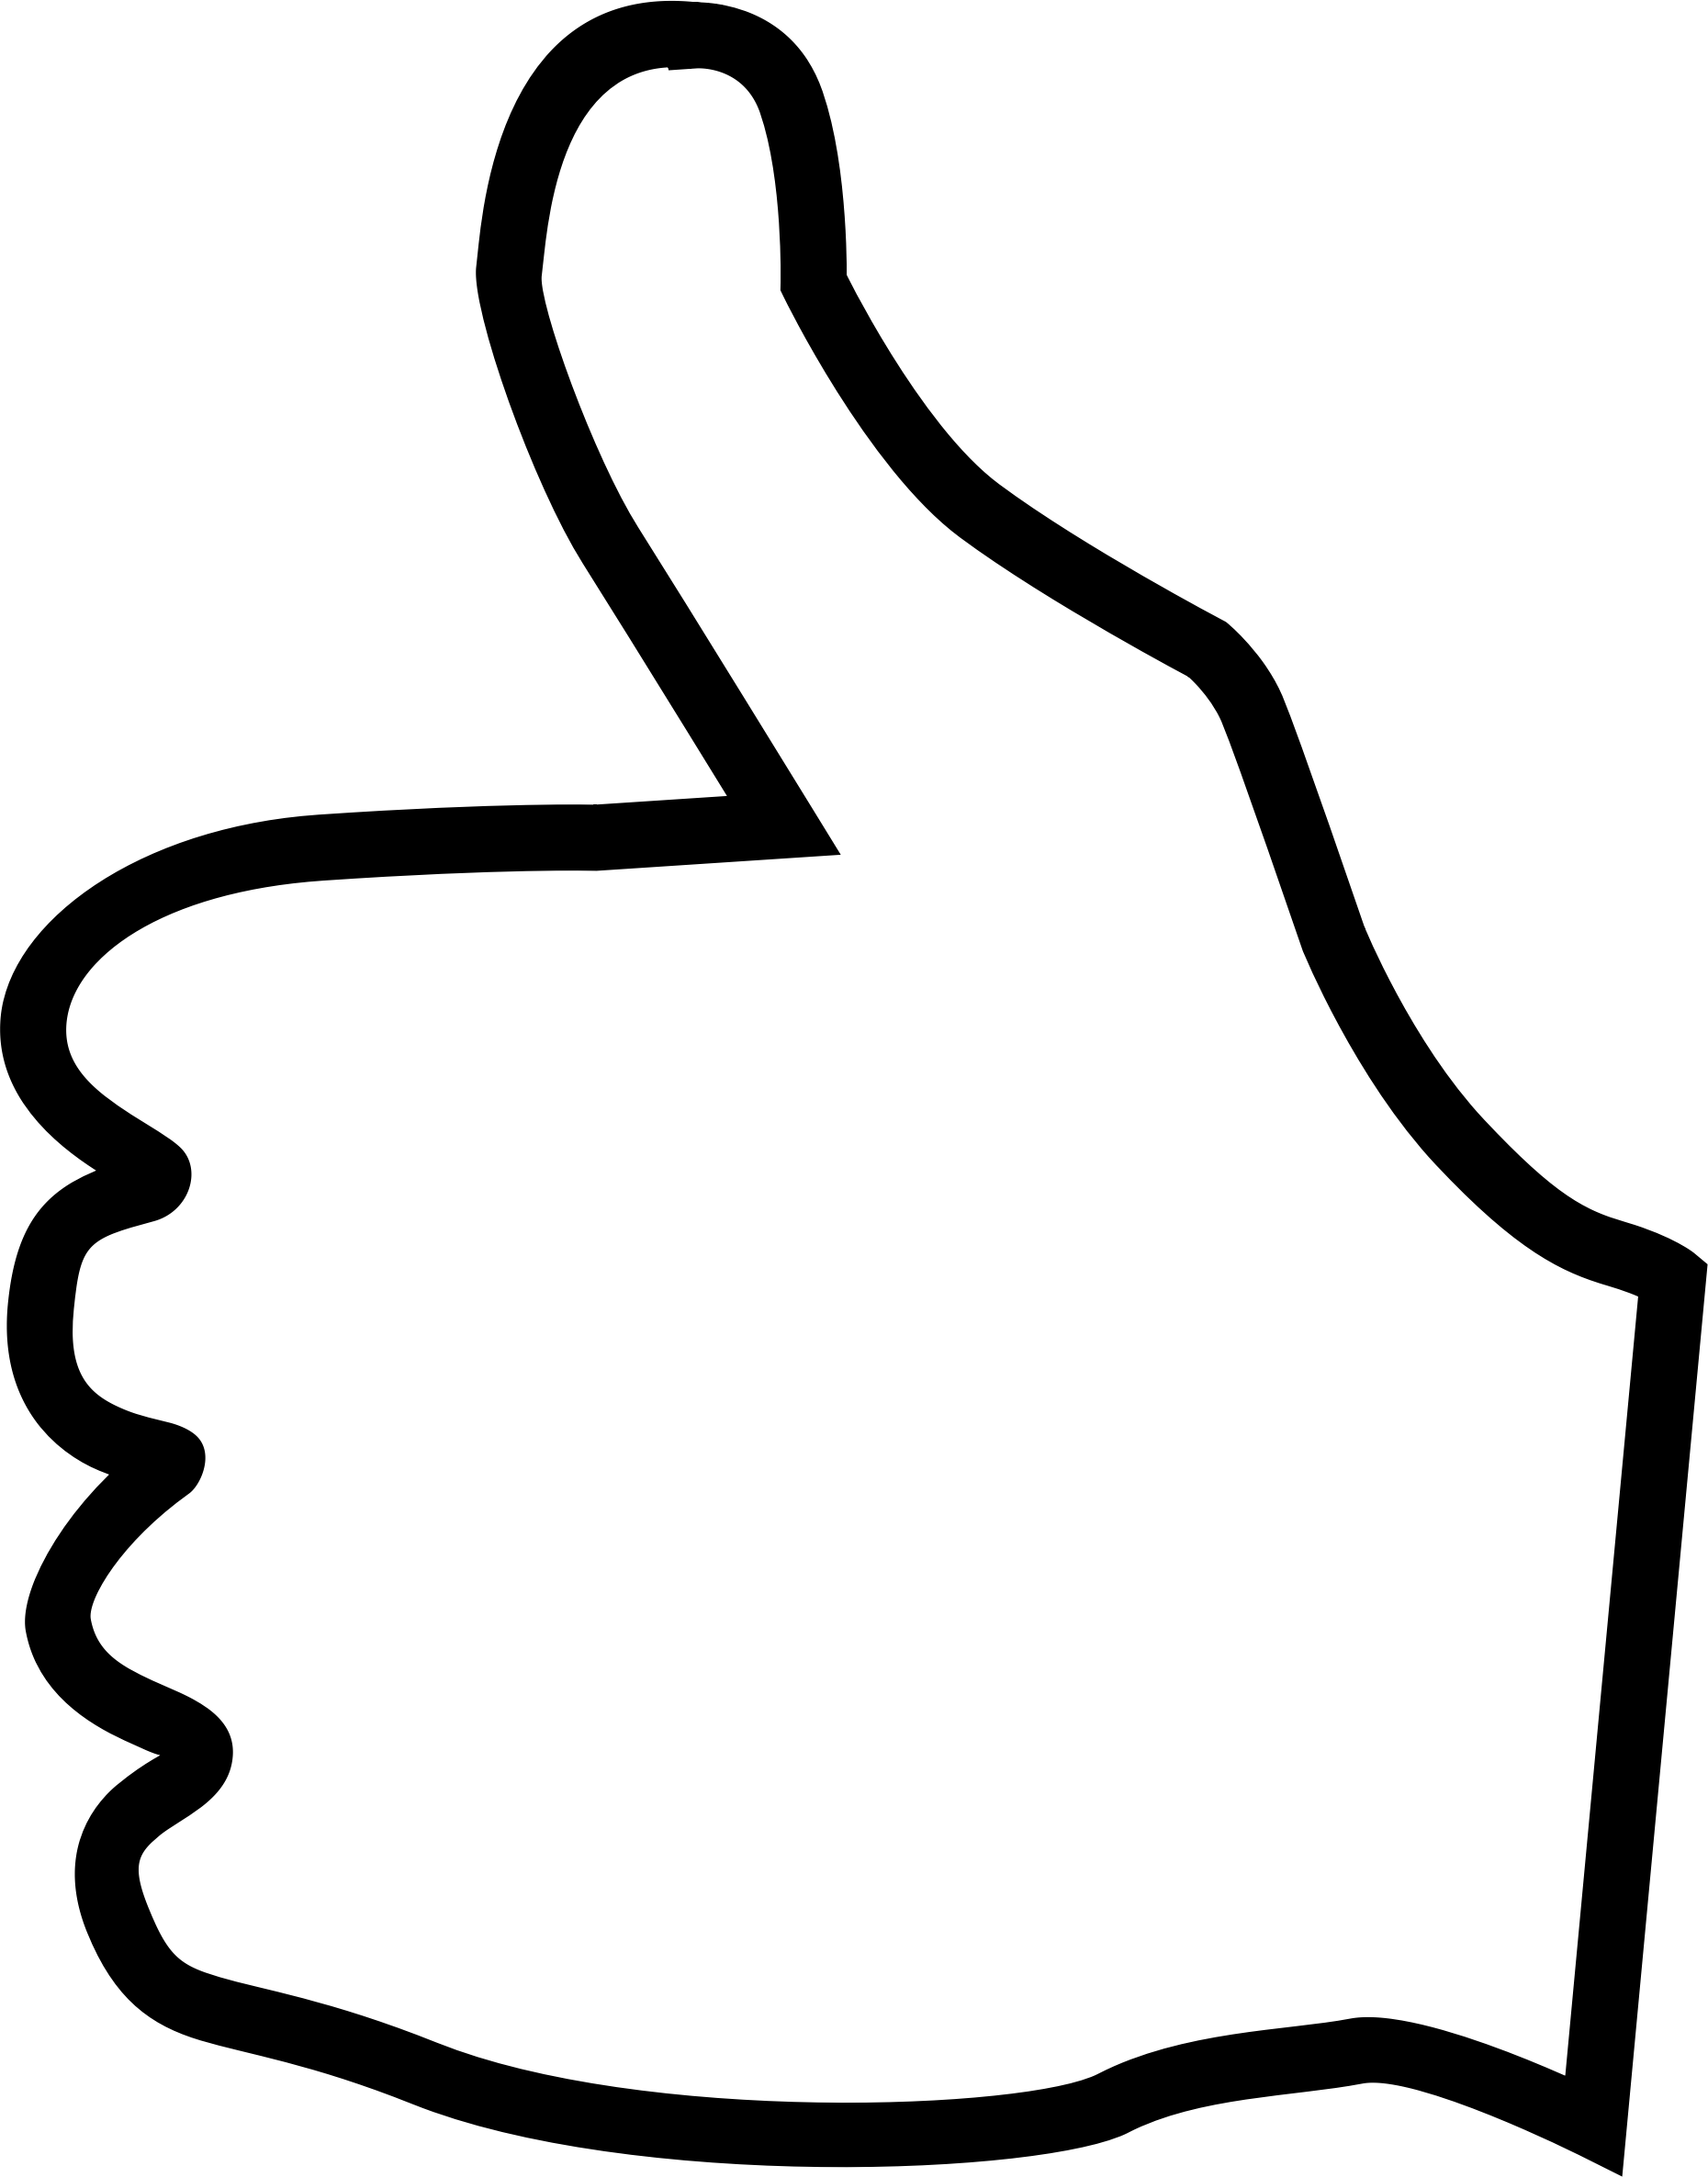 ... Free Thumbs Up Clipart Pictures - Clipartix ...